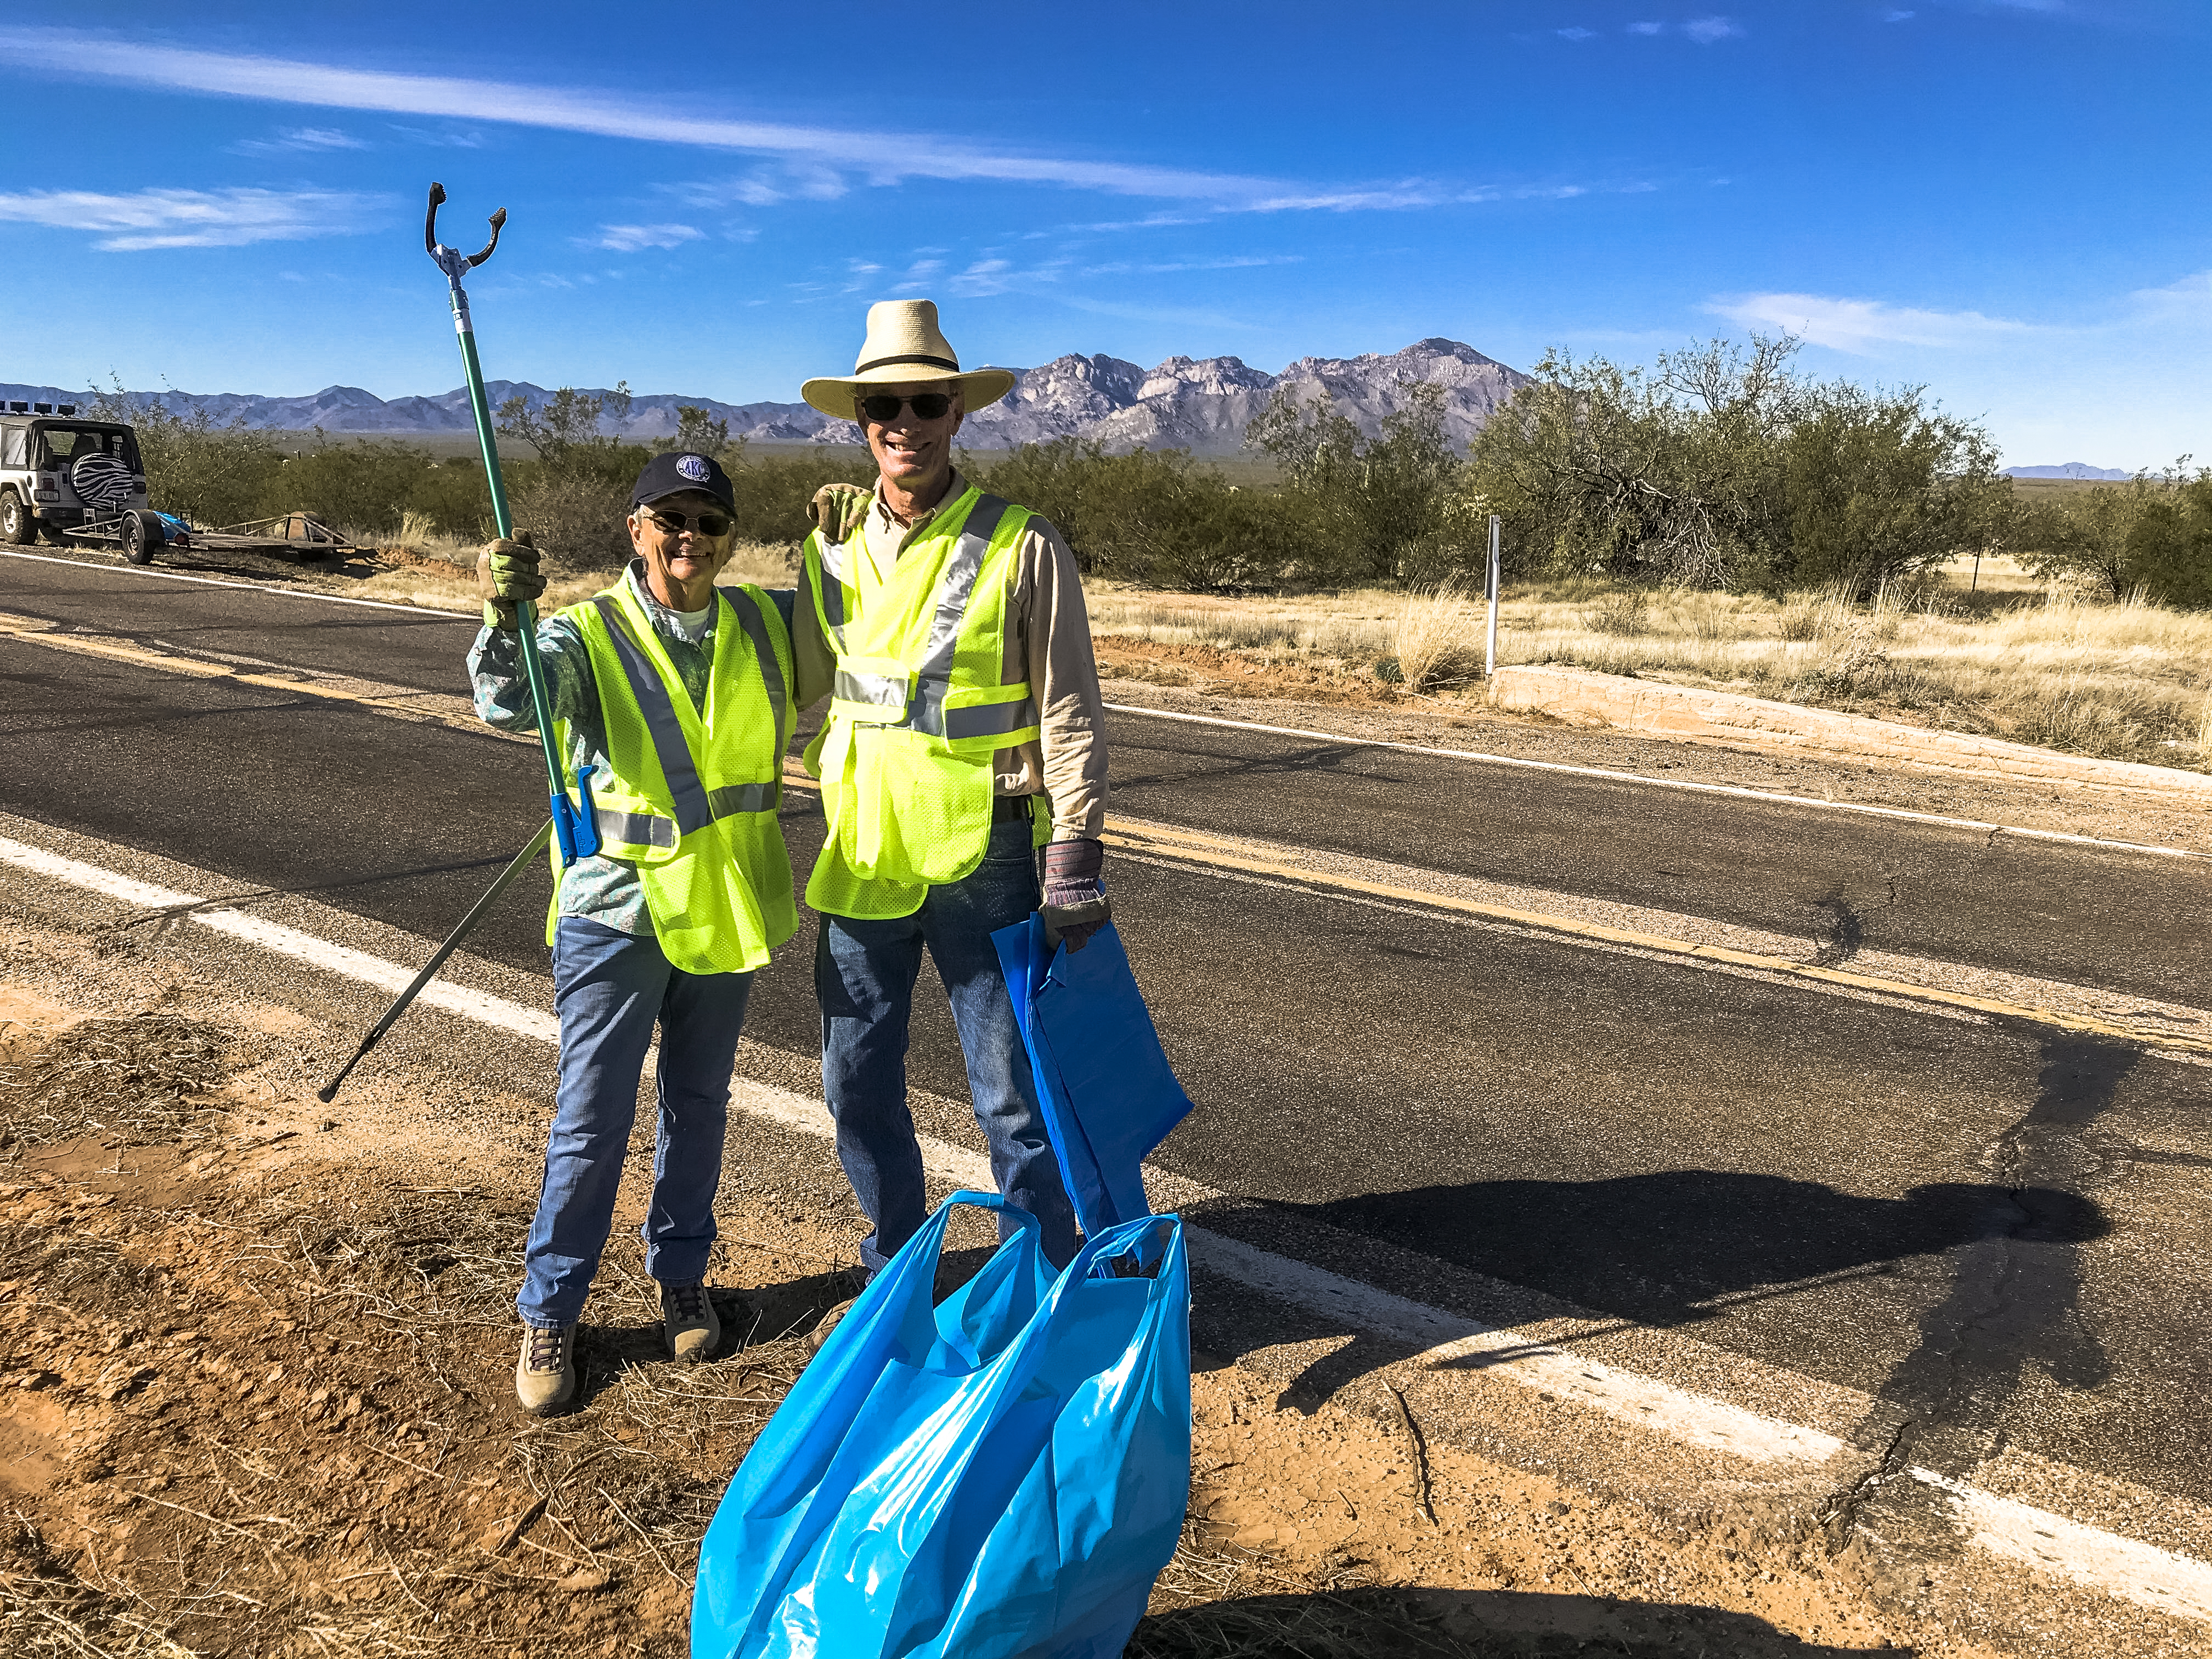 Two people in yellow vests standing on a rural roadside with blue trashbags at their feet.